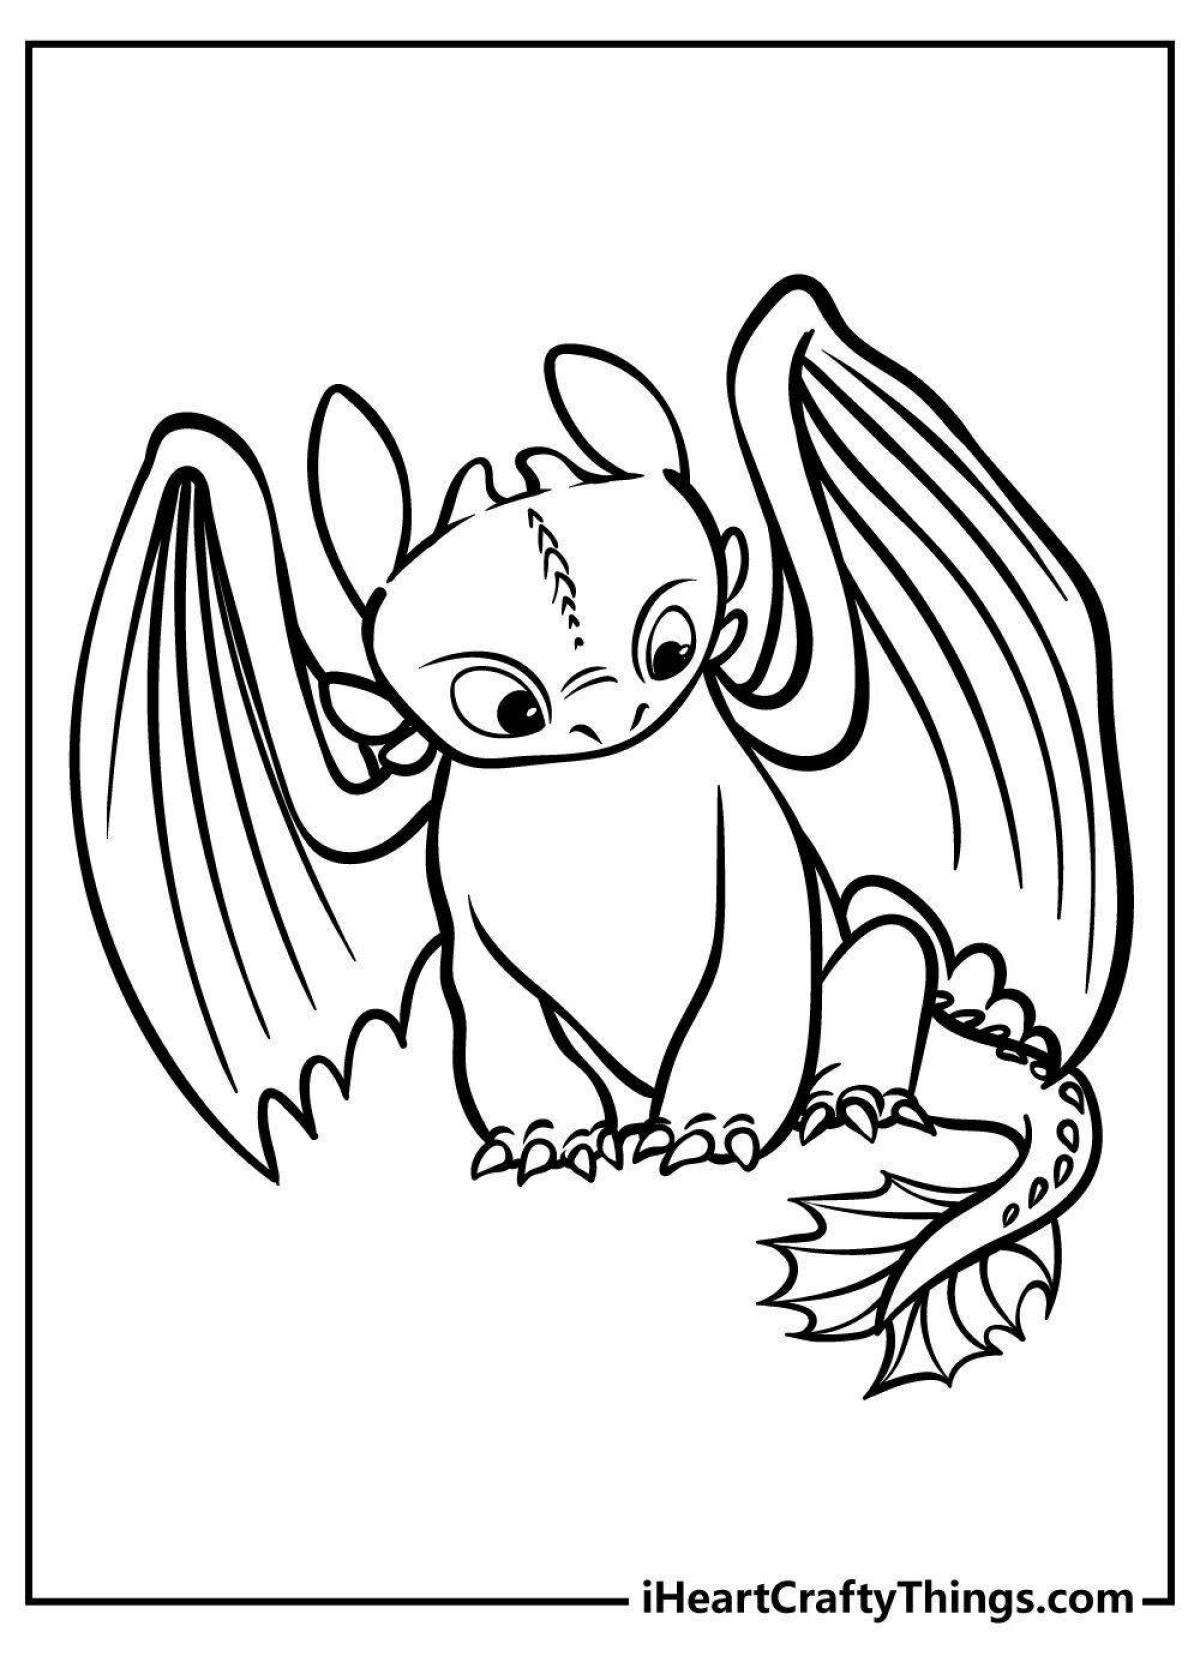 Bright cauldron how to train your dragon coloring book